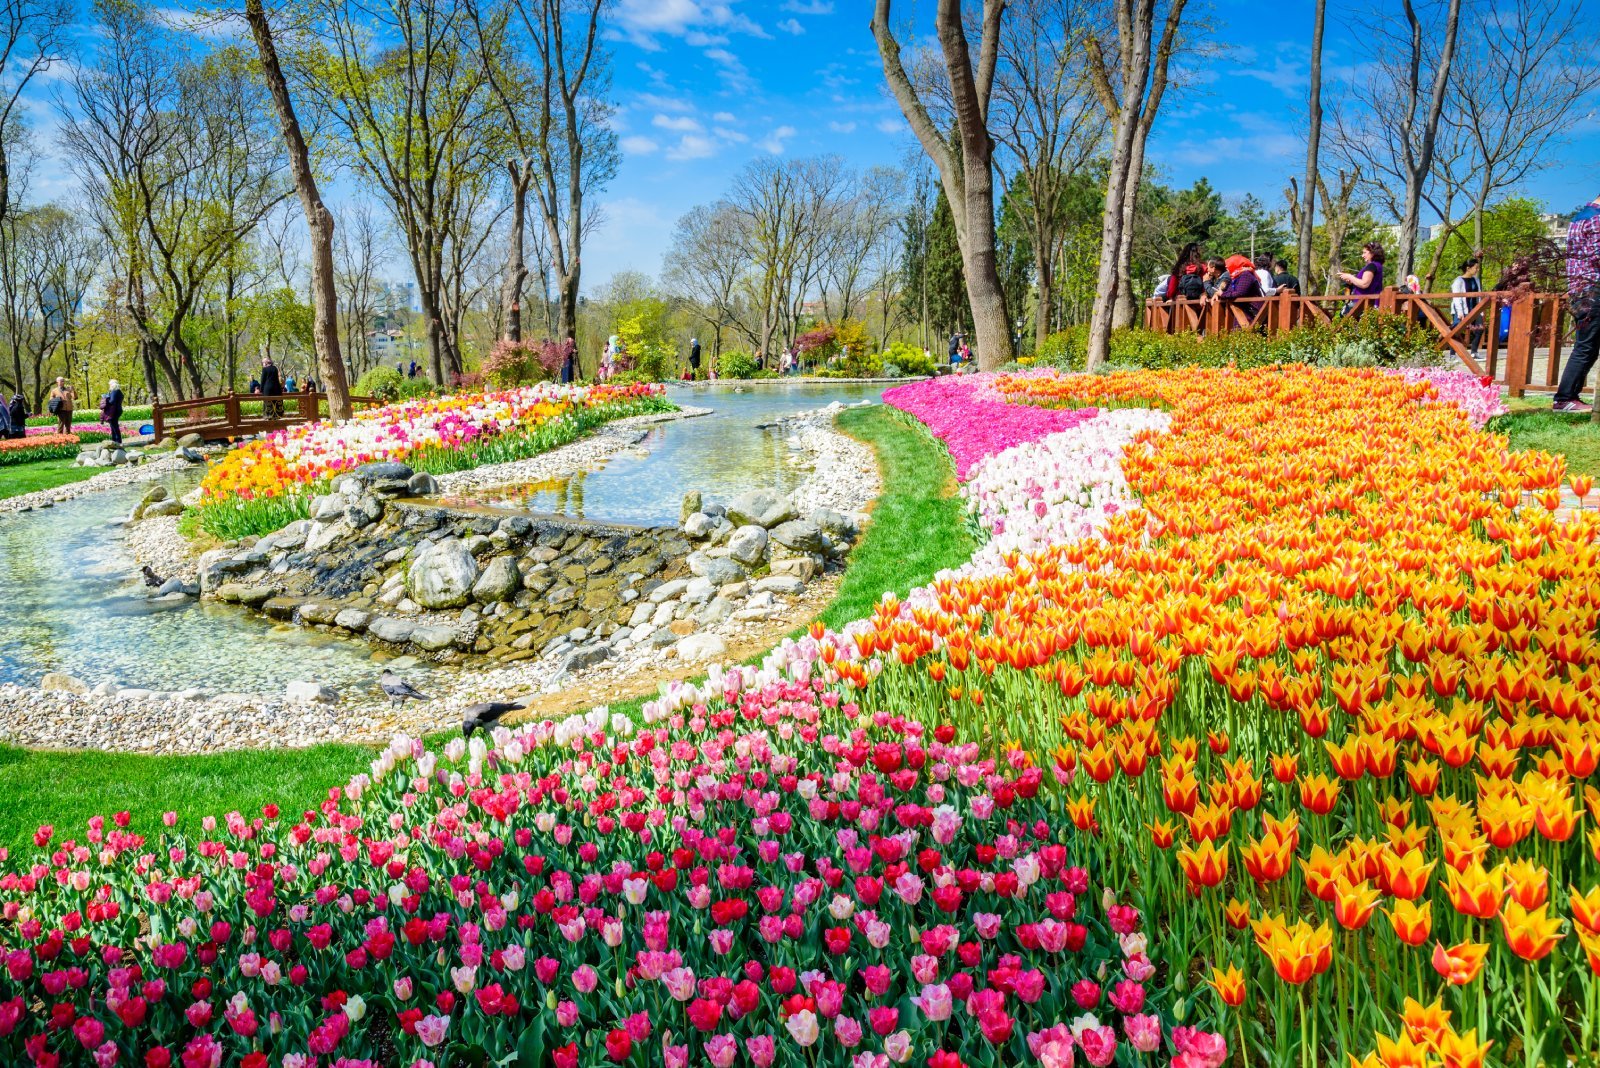 <p class="wp-caption-text">Image Credit: Shutterstock / epic_images</p>  <p><span>Exploring the world’s best flower festivals offers a unique blend of natural beauty, cultural insight, and communal celebration. Each festival, with its distinct charm and setting, invites visitors to delve into the local traditions and landscapes that define it. As you plan your journey, embrace the opportunity to connect with diverse cultures and nature’s splendor, enriching your travel experience with memories that will last a lifetime.</span></p> <p><span>More Articles Like This…</span></p> <p><a href="https://thegreenvoyage.com/barcelona-discover-the-top-10-beach-clubs/"><span>Barcelona: Discover the Top 10 Beach Clubs</span></a></p> <p><a href="https://thegreenvoyage.com/top-destination-cities-to-visit/"><span>2024 Global City Travel Guide – Your Passport to the World’s Top Destination Cities</span></a></p> <p><a href="https://thegreenvoyage.com/exploring-khao-yai-a-hidden-gem-of-thailand/"><span>Exploring Khao Yai 2024 – A Hidden Gem of Thailand</span></a></p> <p><span>The post <a href="https://passingthru.com/worlds-most-stunning-flower-festivals/">World’s Most Stunning Flower Festivals Worth Adding to Your Bucketlist!</a> republished on </span><a href="https://passingthru.com/"><span>Passing Thru</span></a><span> with permission from </span><a href="https://thegreenvoyage.com/"><span>The Green Voyage</span></a><span>.</span></p> <p><span>Featured Image Credit: Shutterstock / Djay7.</span></p> <p><span>For transparency, this content was partly developed with AI assistance and carefully curated by an experienced editor to be informative and ensure accuracy.</span></p>